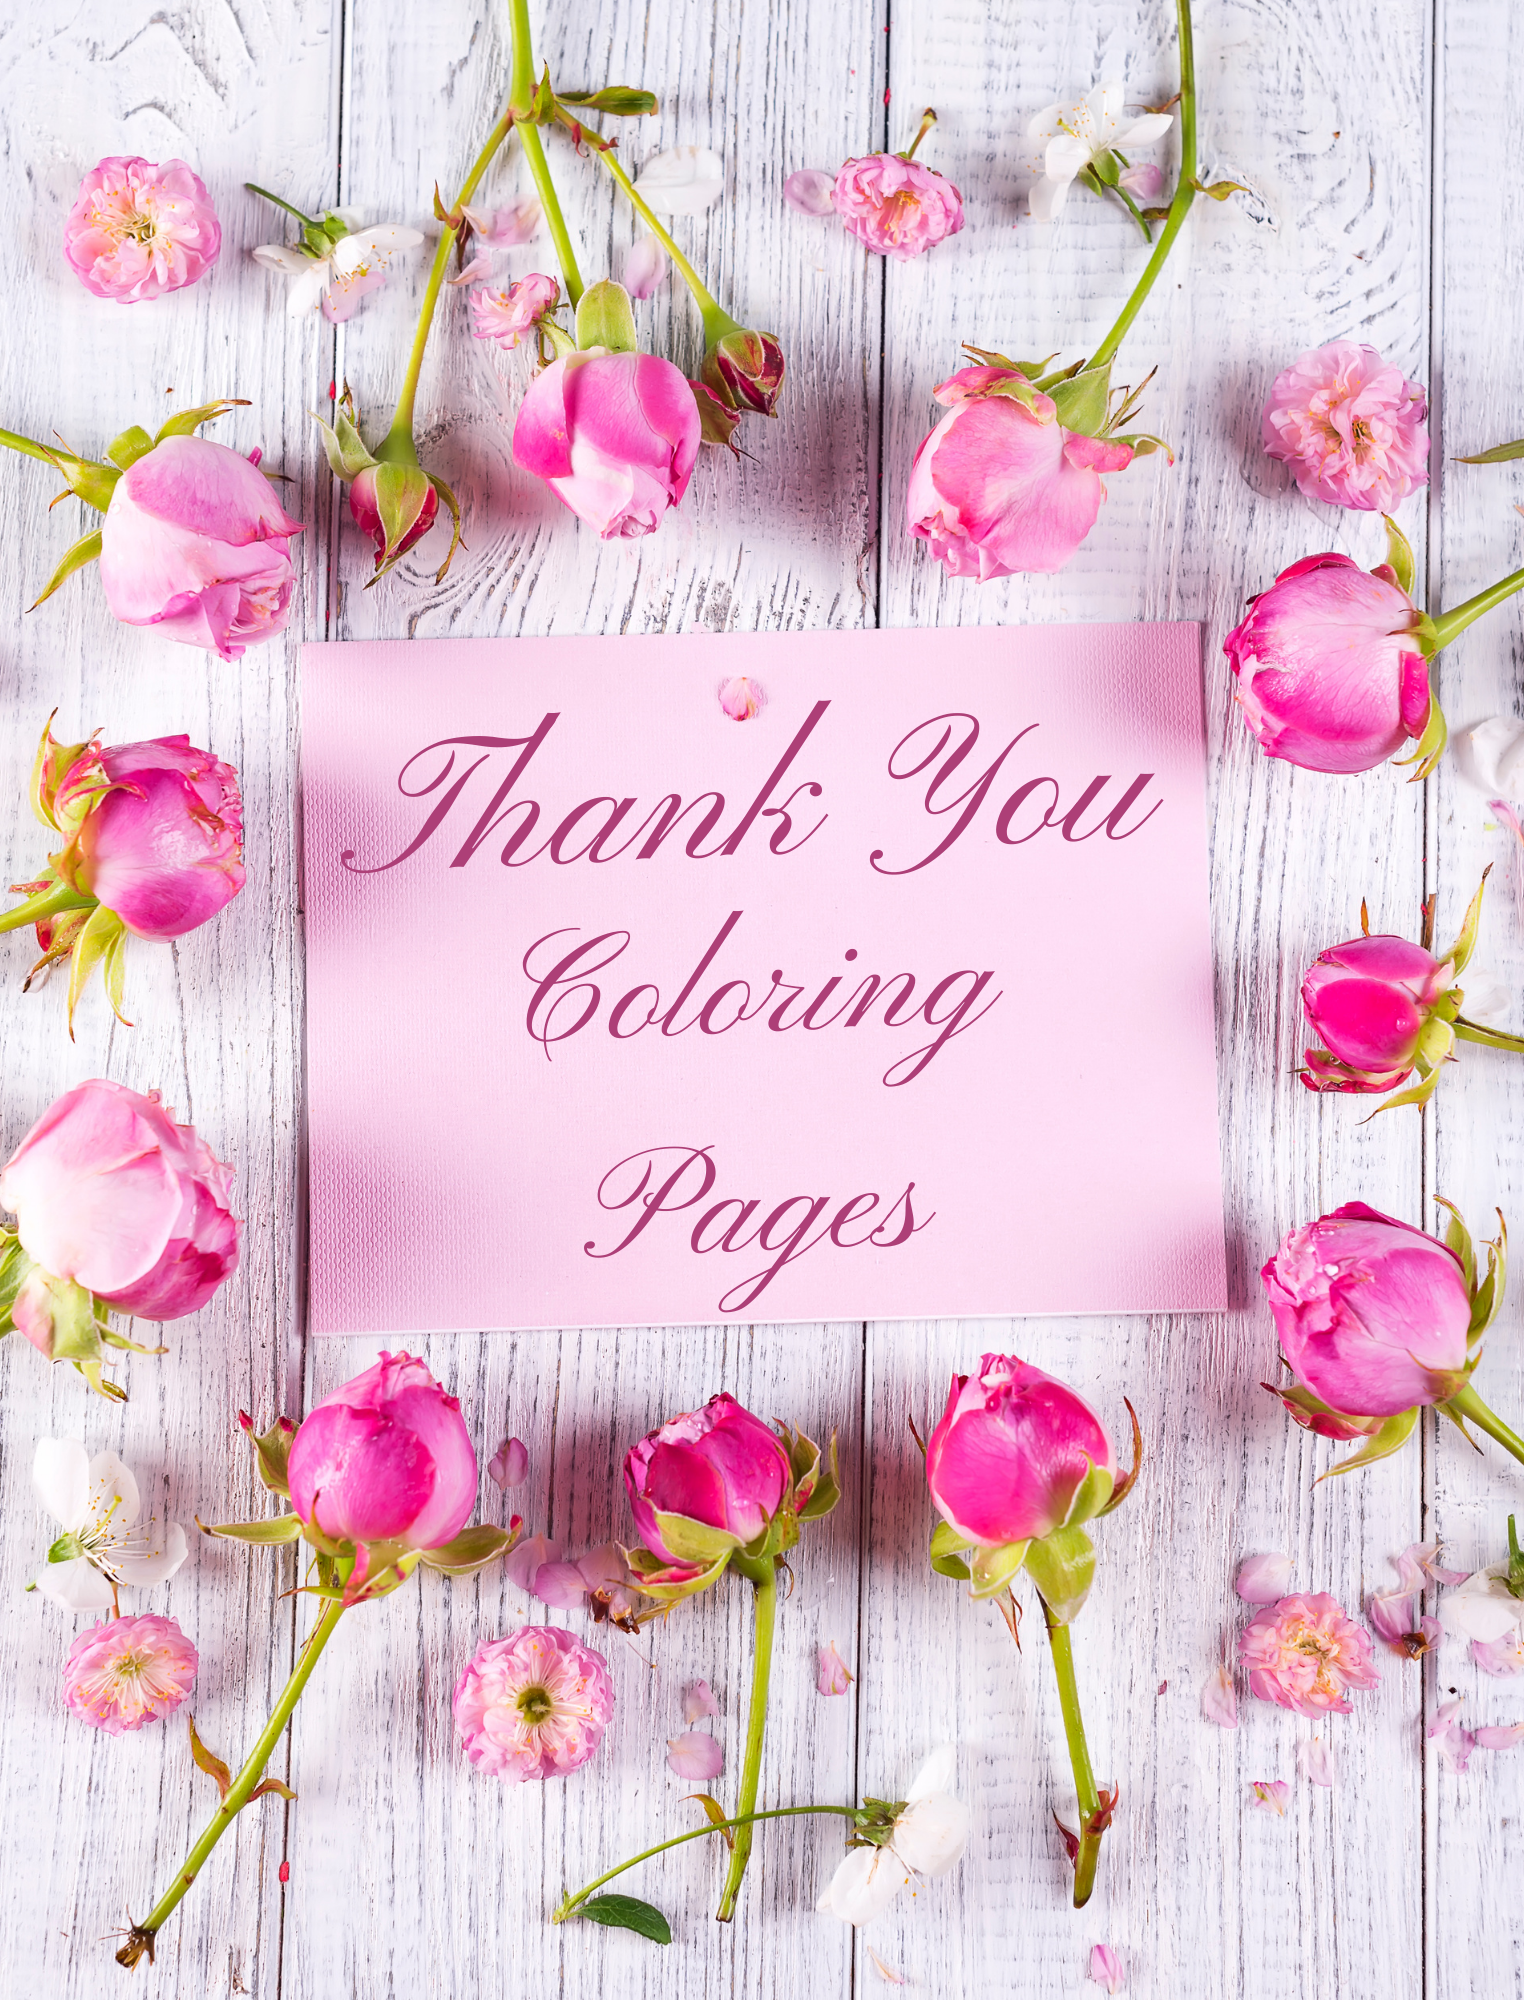 16 Thank You Coloring Pages (Free Printable)